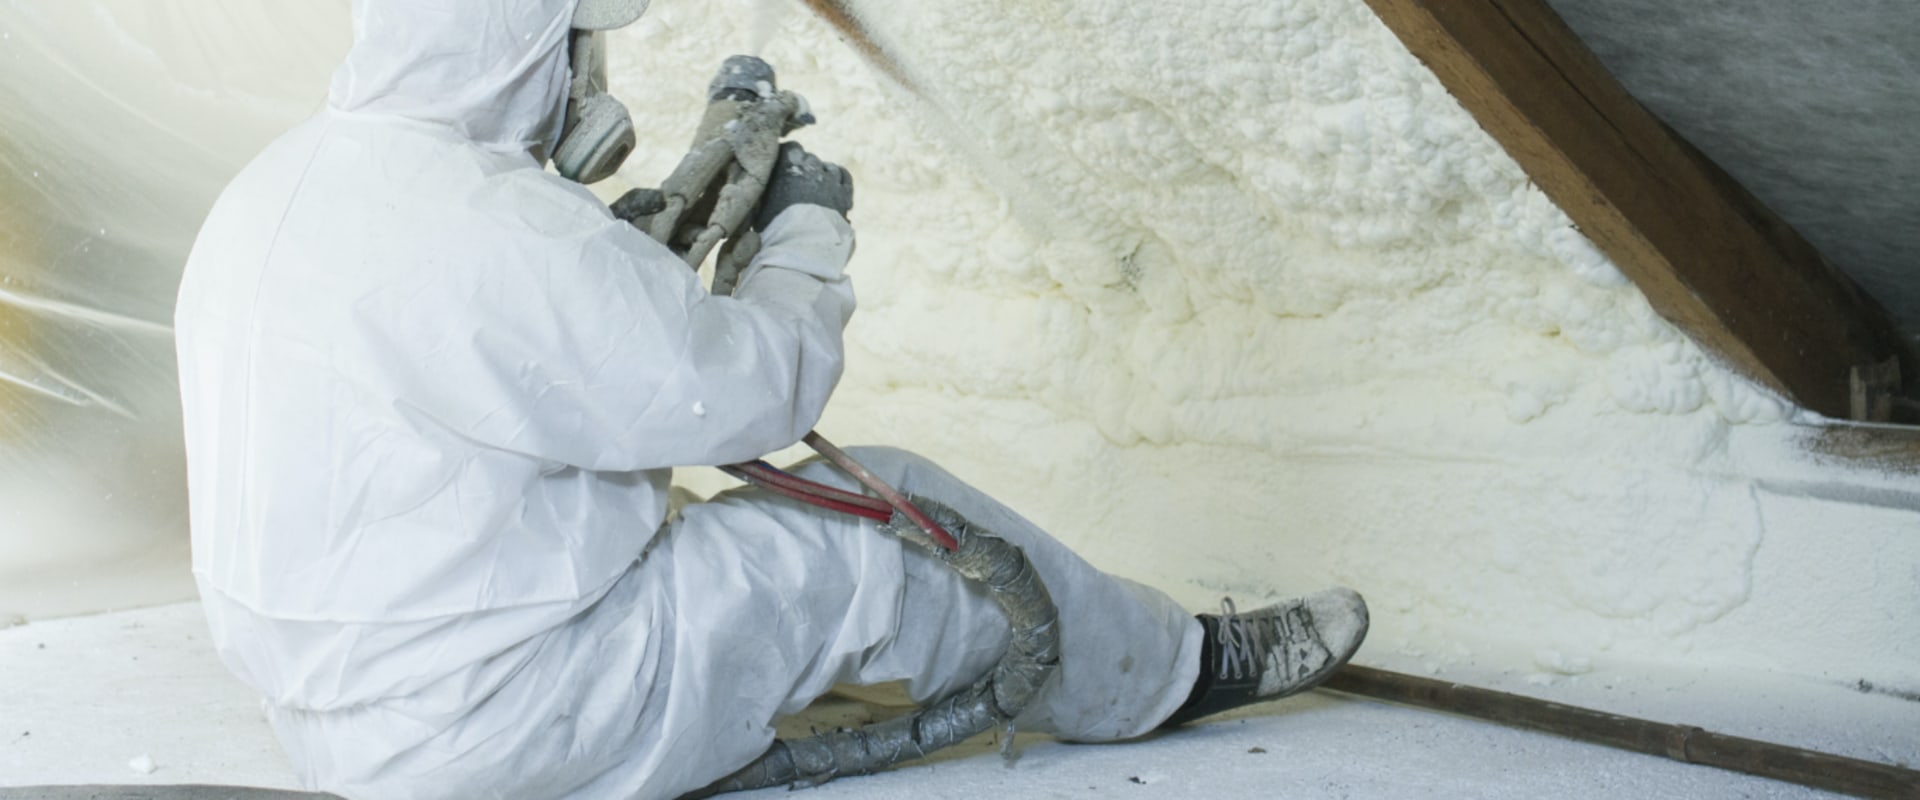 Insulating Your Attic in Hot and Humid Climates: What You Need to Know